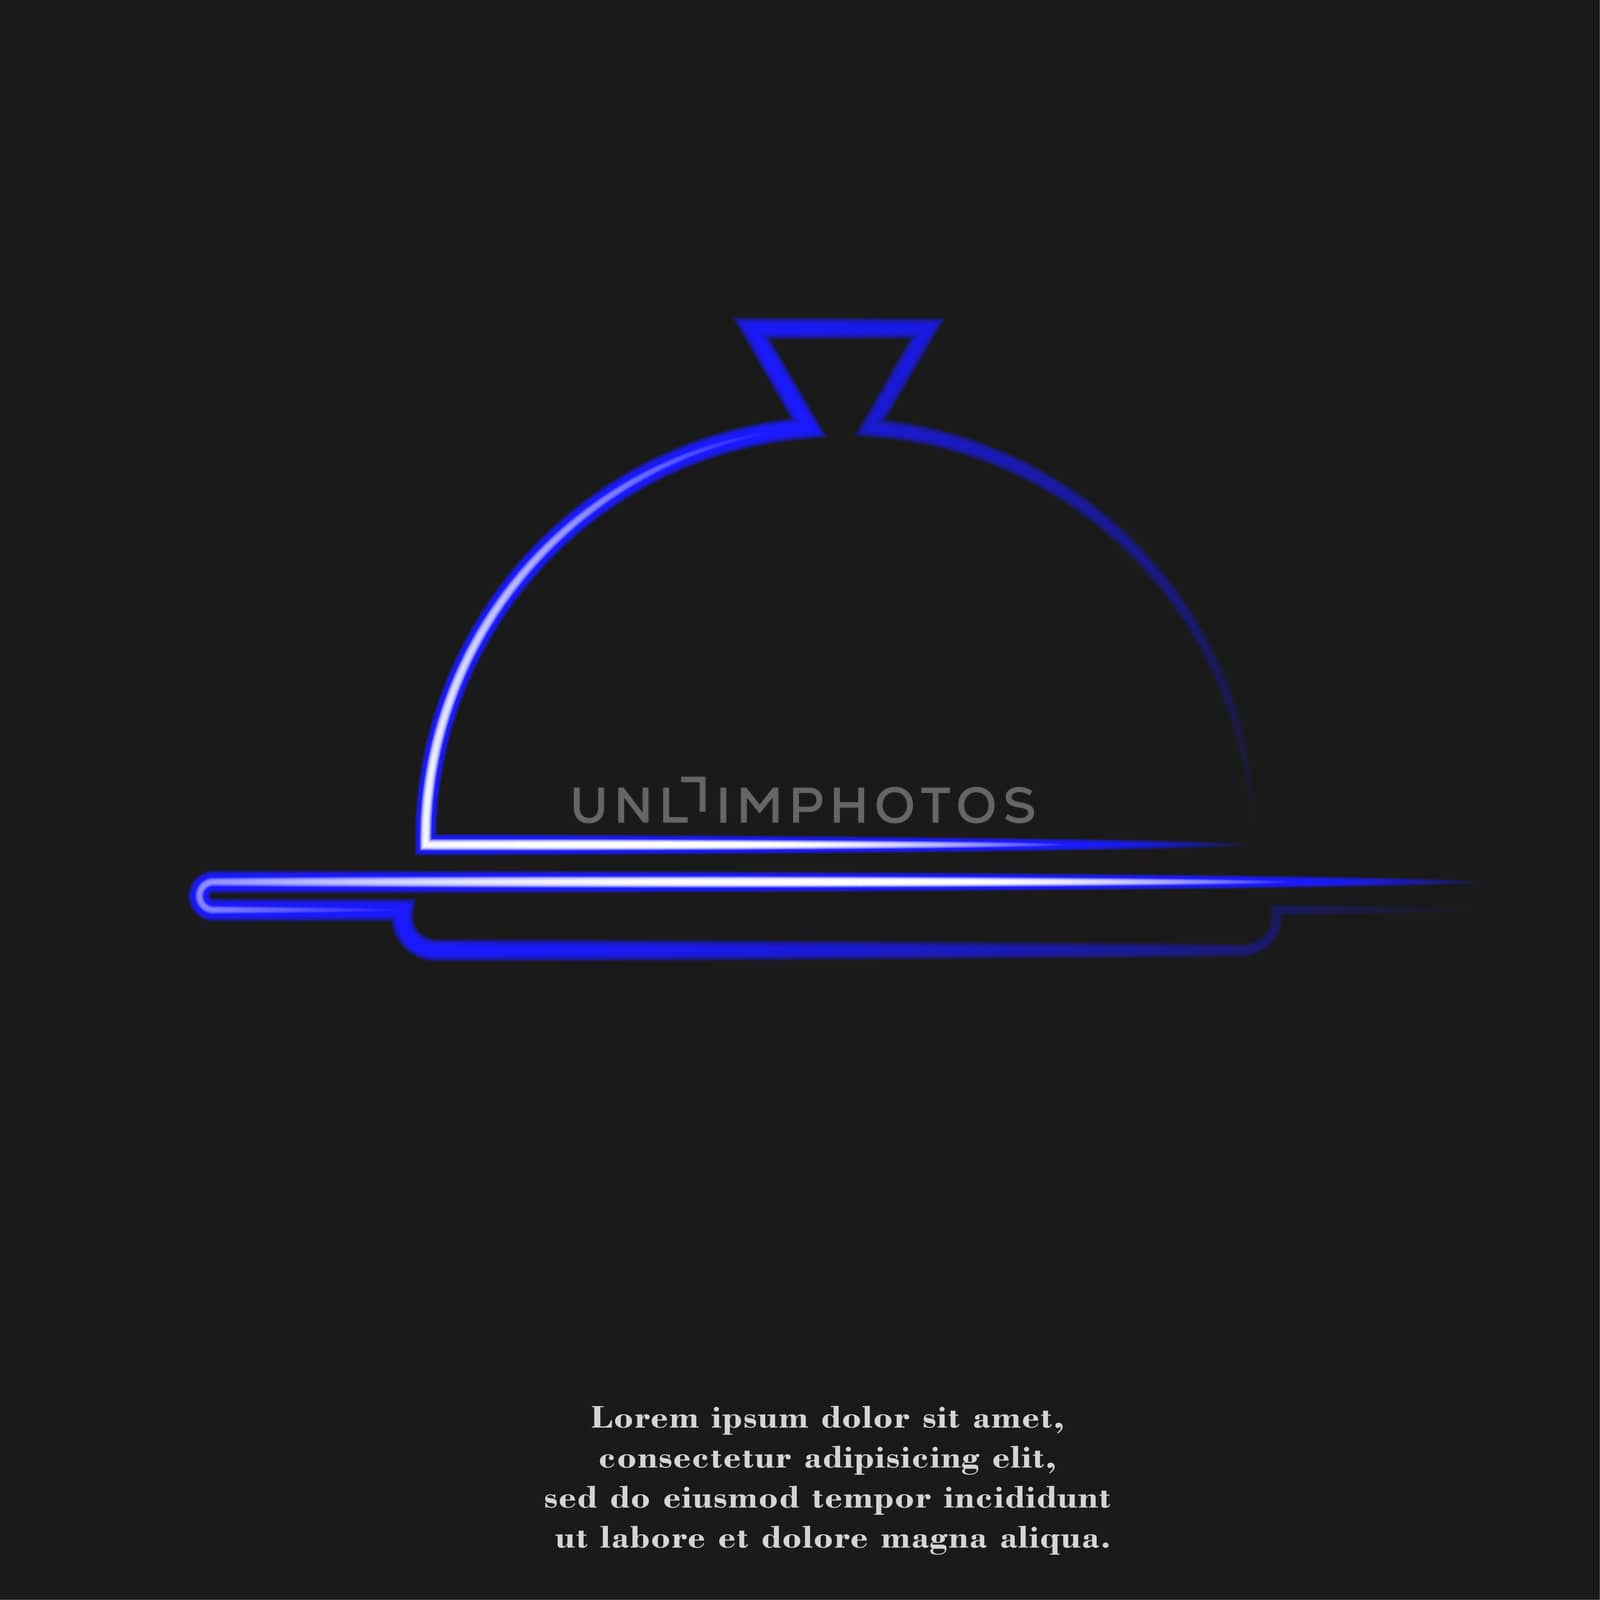 Restaurant cloche icon flat design with abstract background by serhii_lohvyniuk